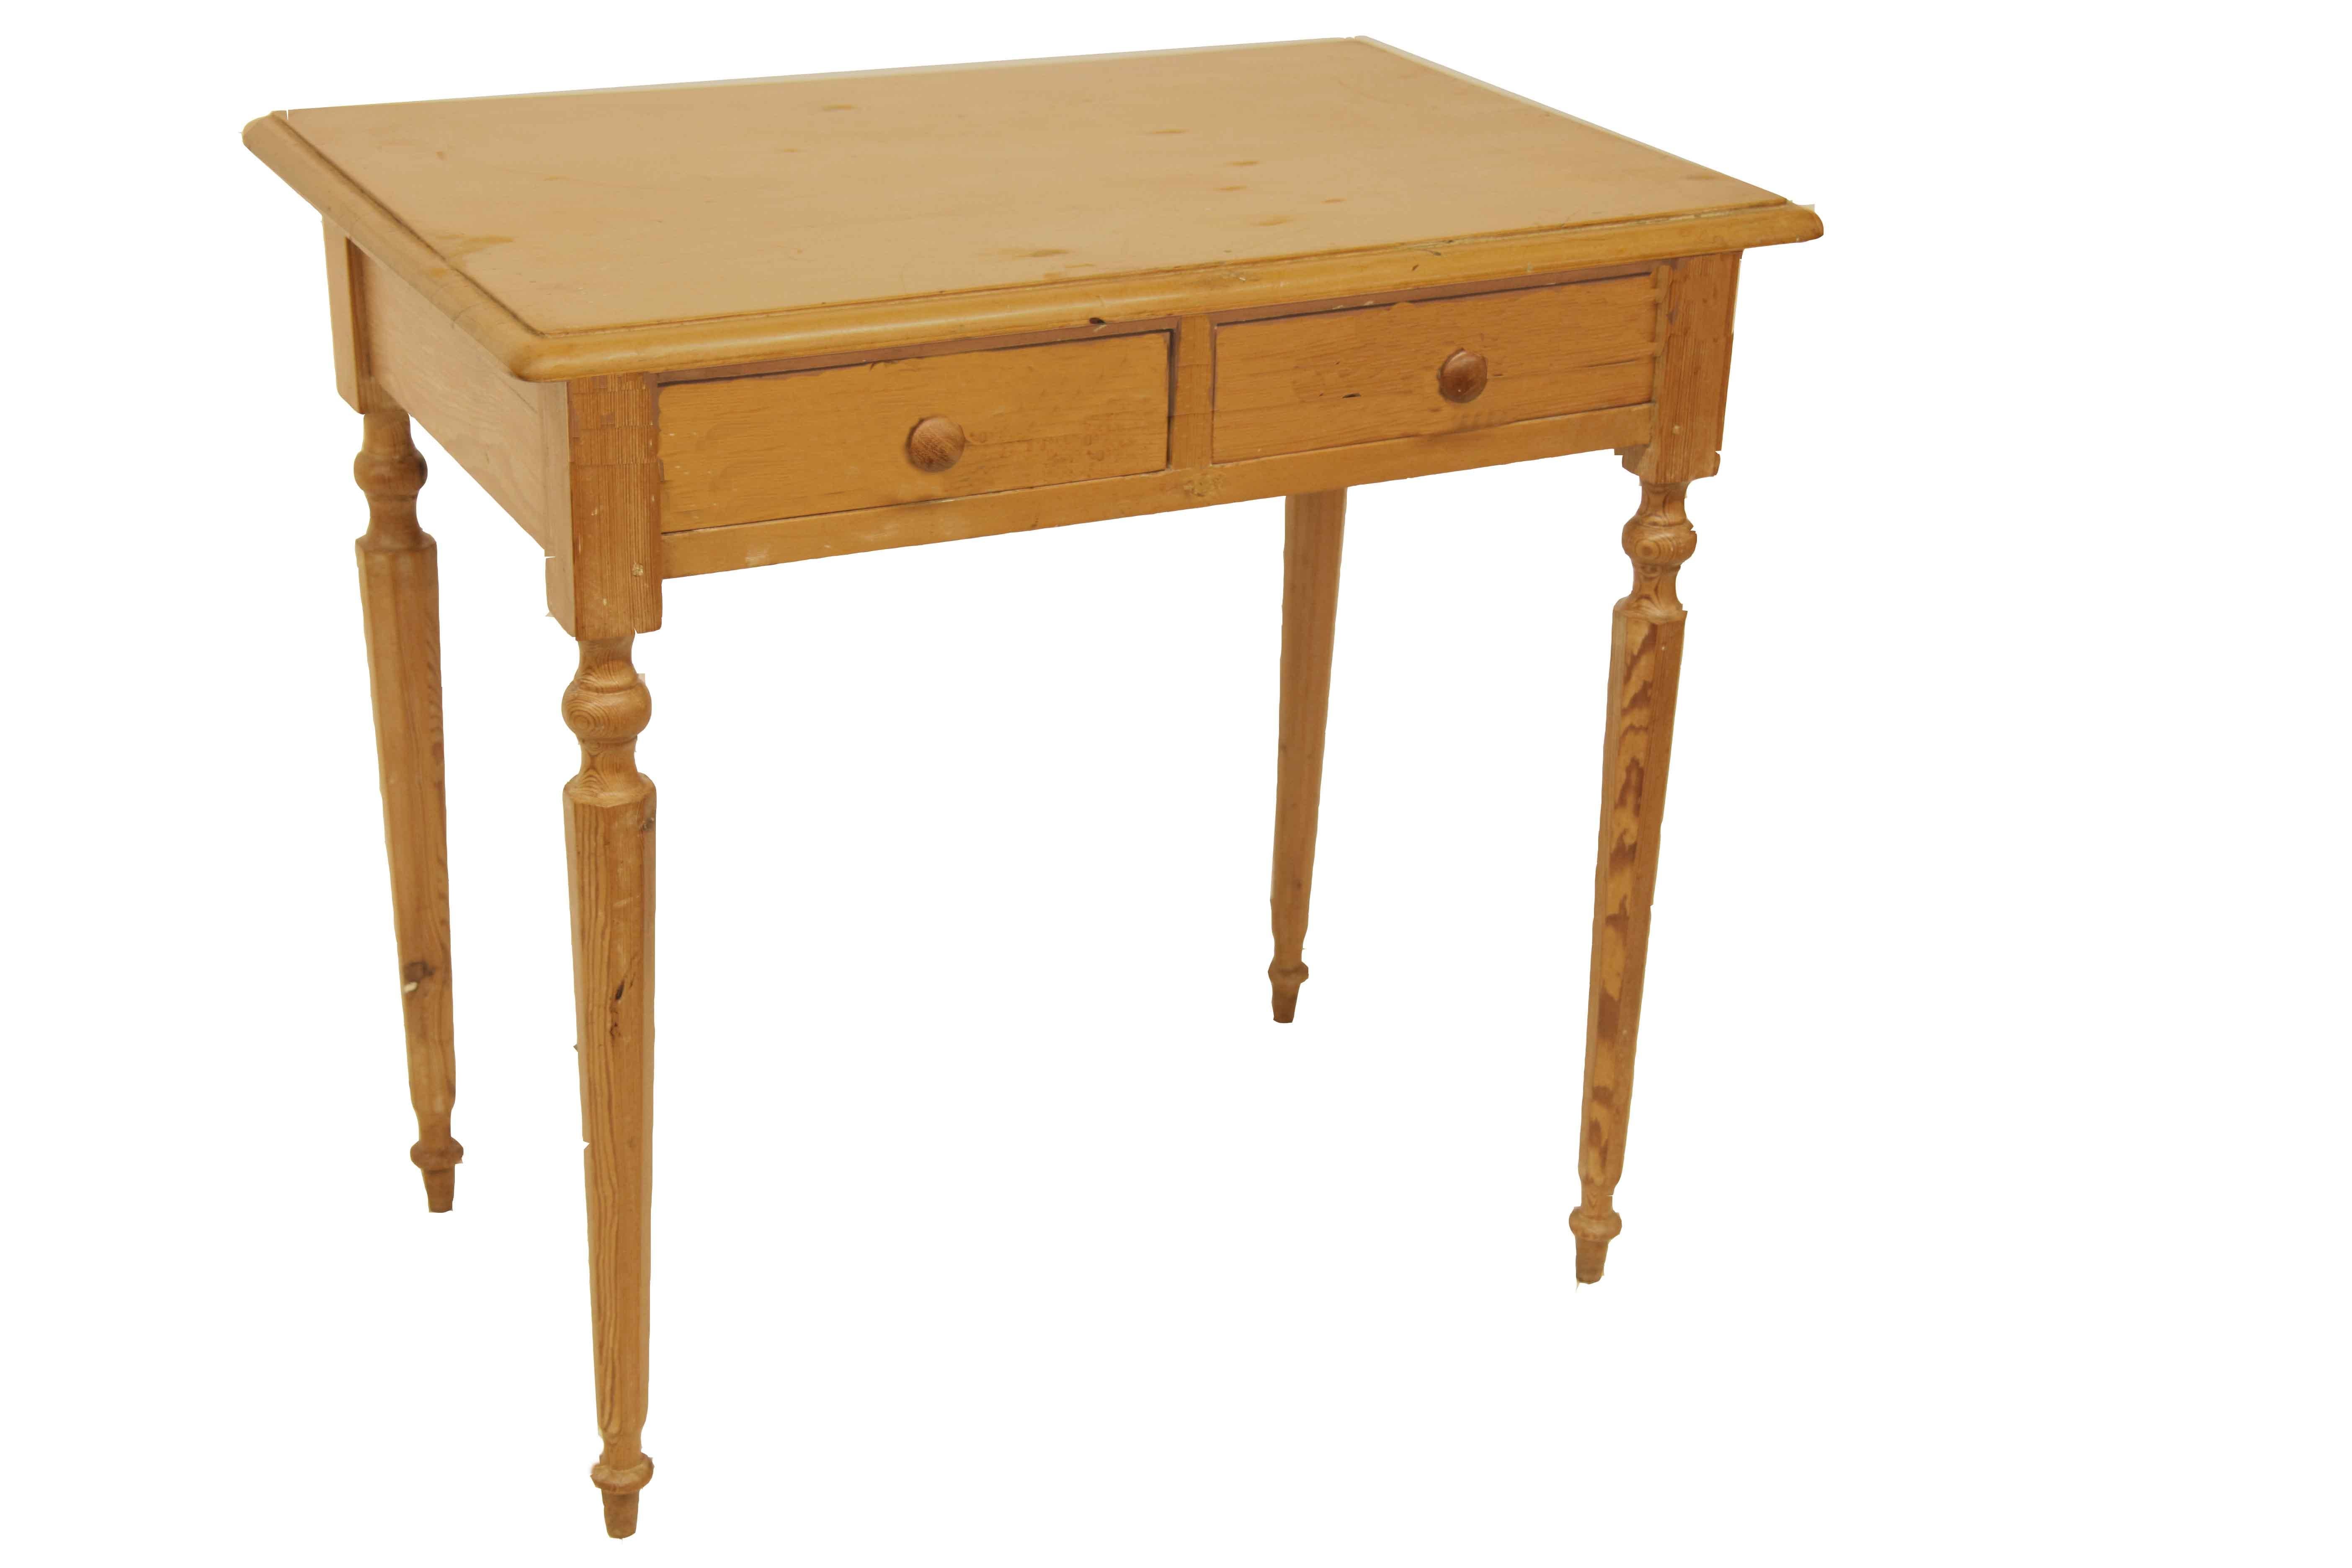 English pine two drawer table, this table, with a wax finish, has a warm color and patina; the unique feature are the tapered and turned legs that each have a octagonal shape. The two drawers retain the original knobs. Of note, there is enough